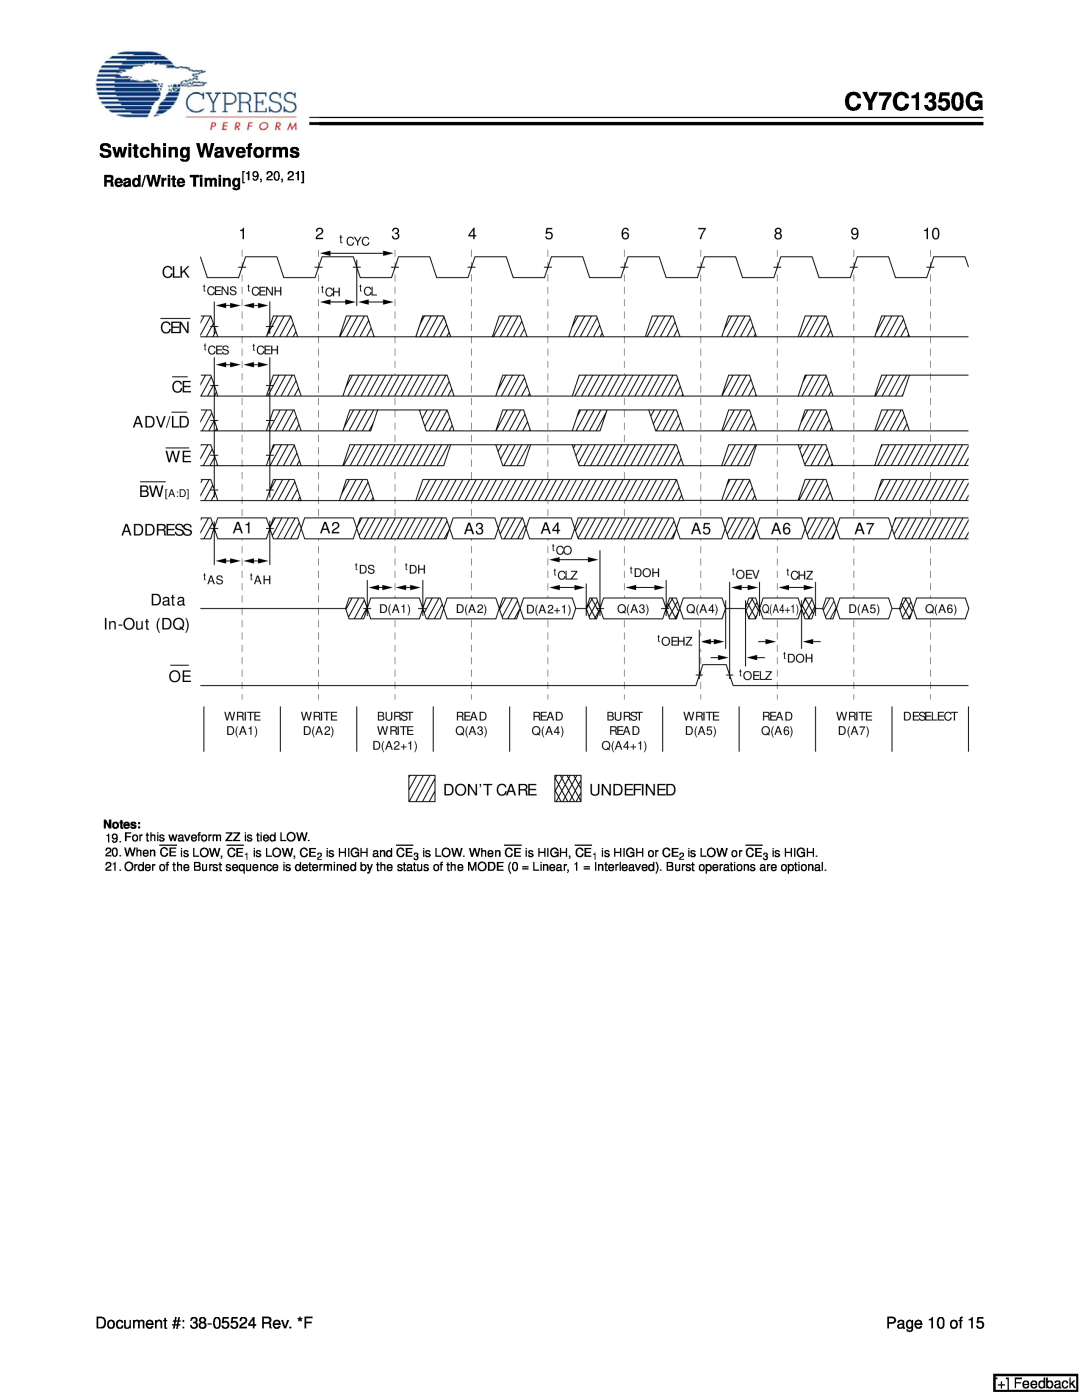 Cypress CY7C1350G manual Switching Waveforms, Read/Write Timing19, 20 